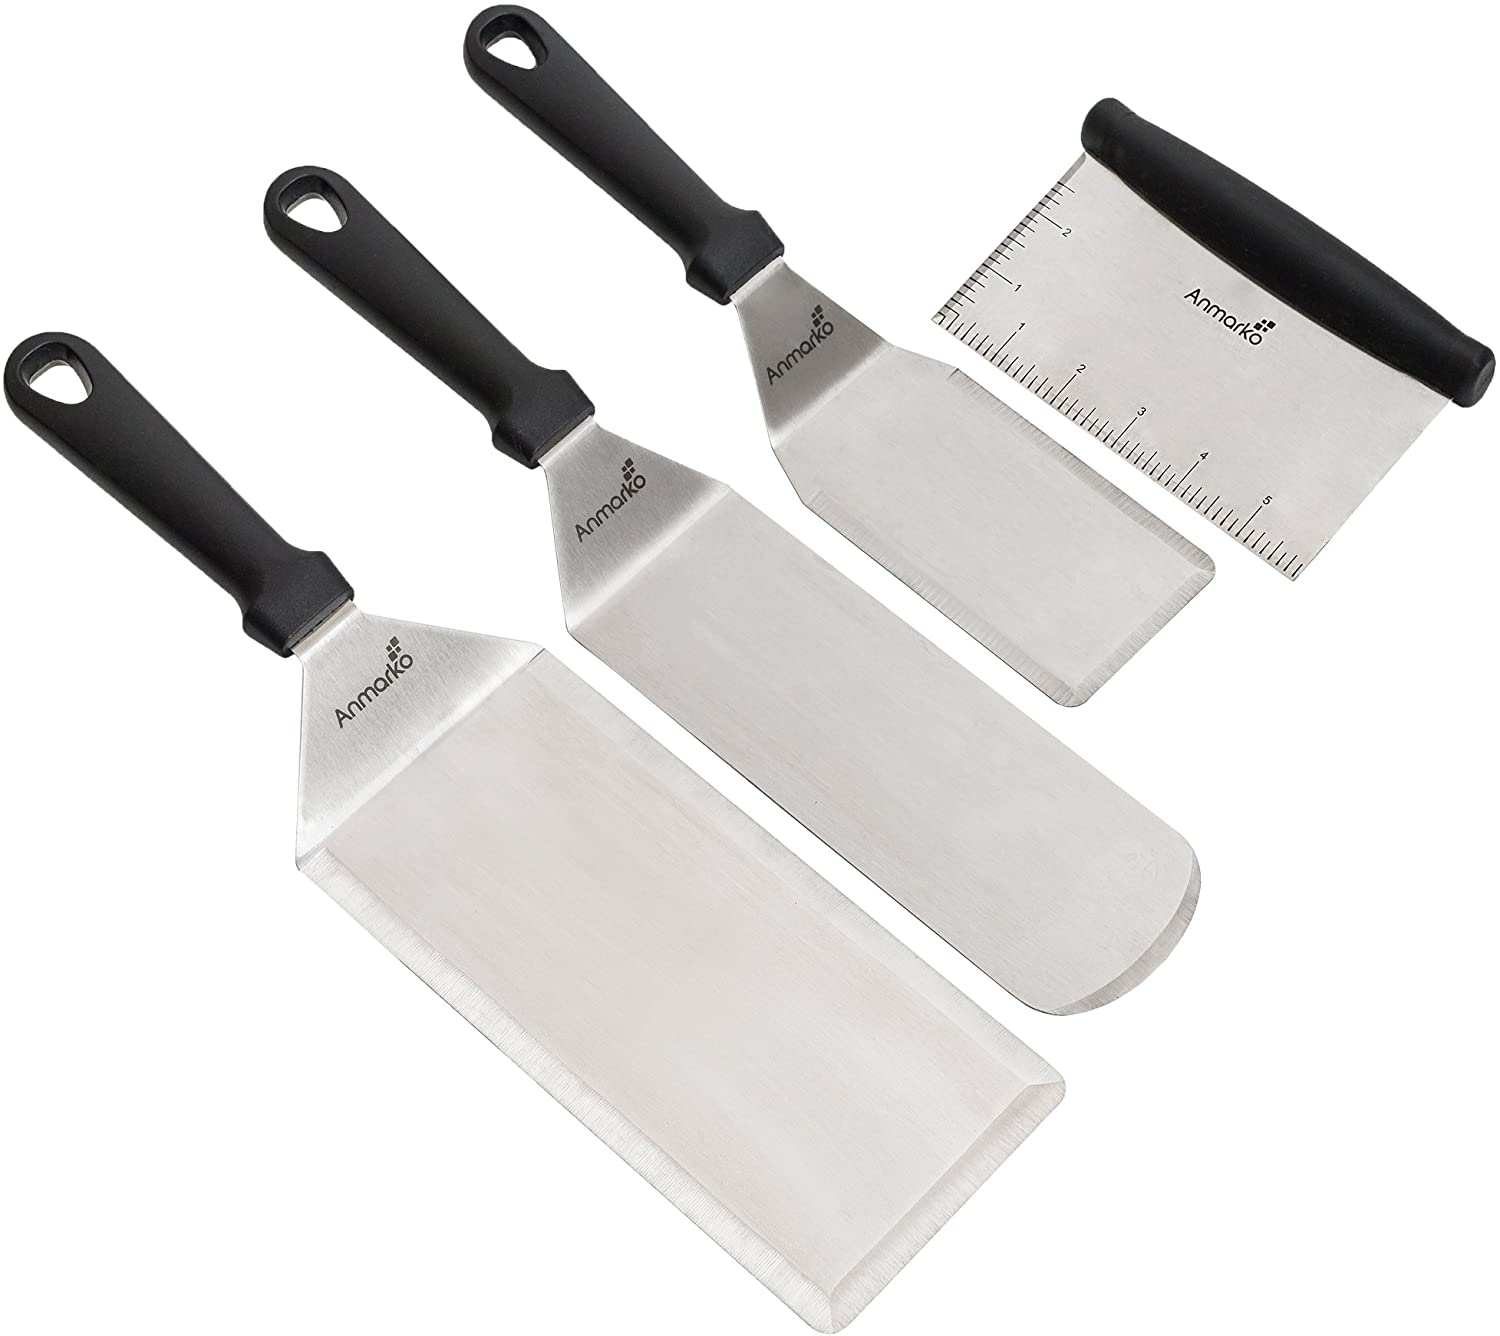 Stainless Steel Metal Spatula Set Griddle Scraper Flat Spatula Pancake Flipper Hamburger Turner Metal Utensil great for BBQ Grill Flat Top Cast Iron Griddle Accessories Commercial Grade